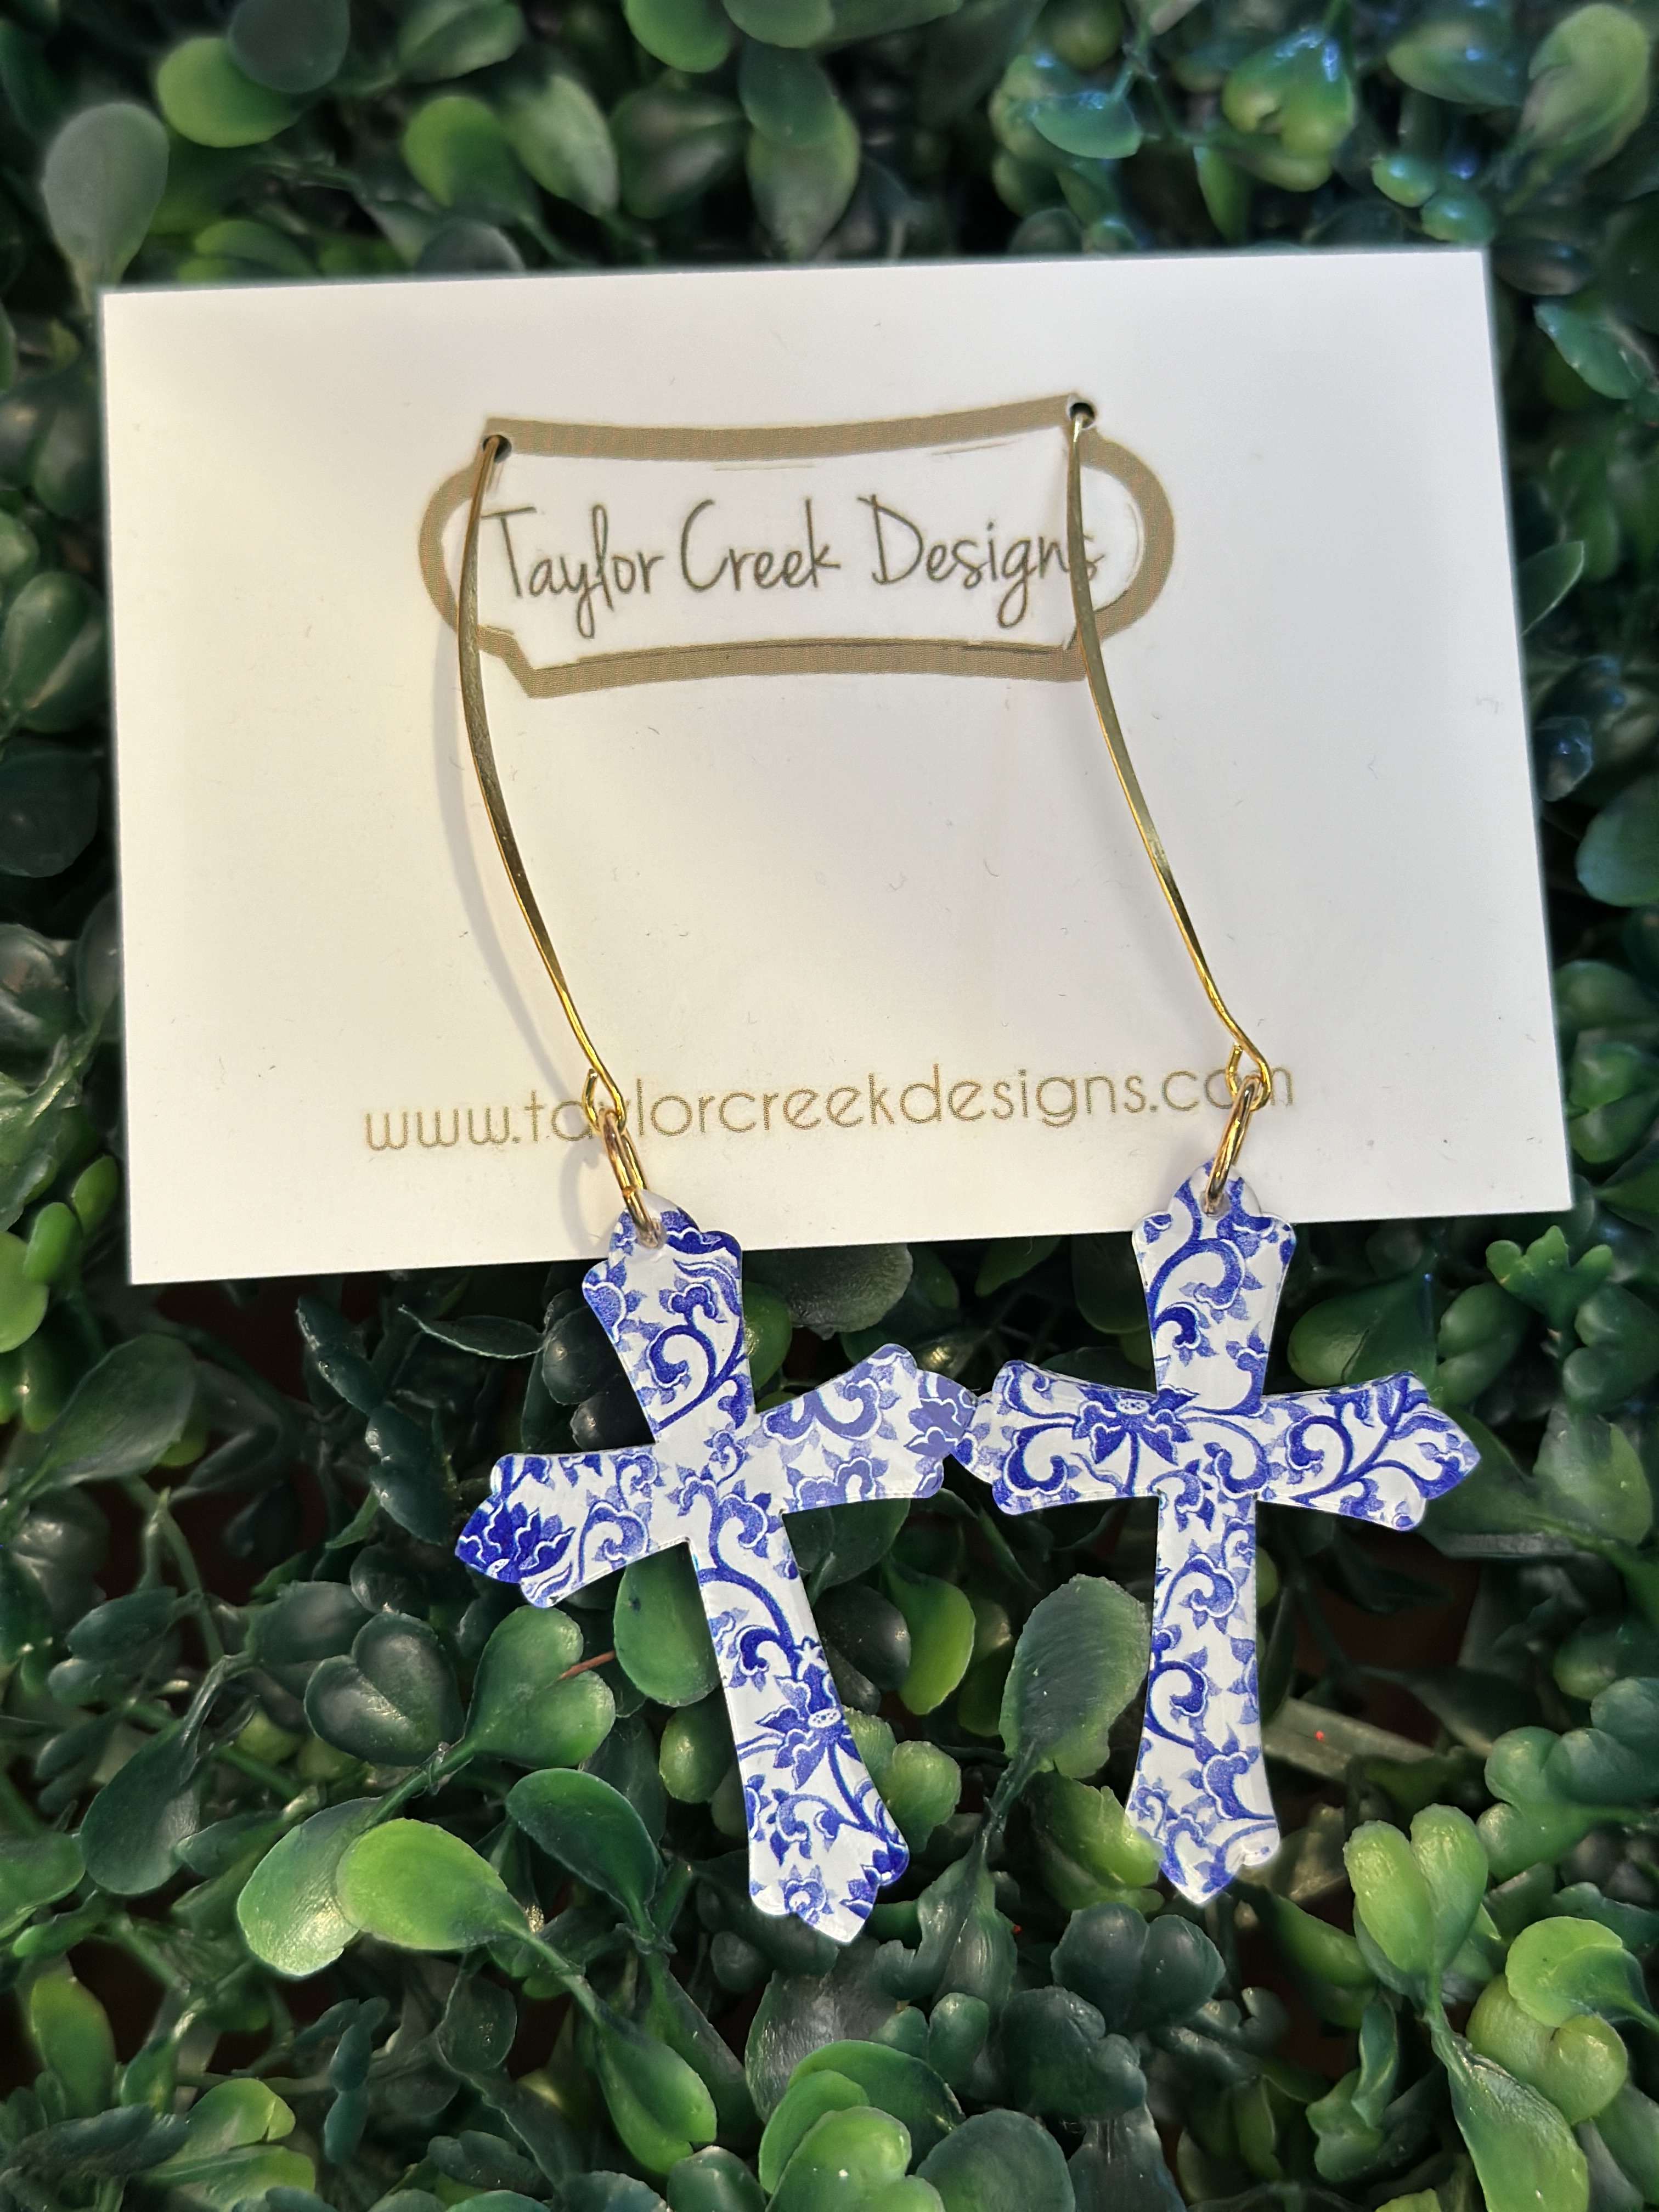 Blue and White Cross Earrings - These Taylor Creek Design cross earrings are simply beautiful even for the sensitive ears. 